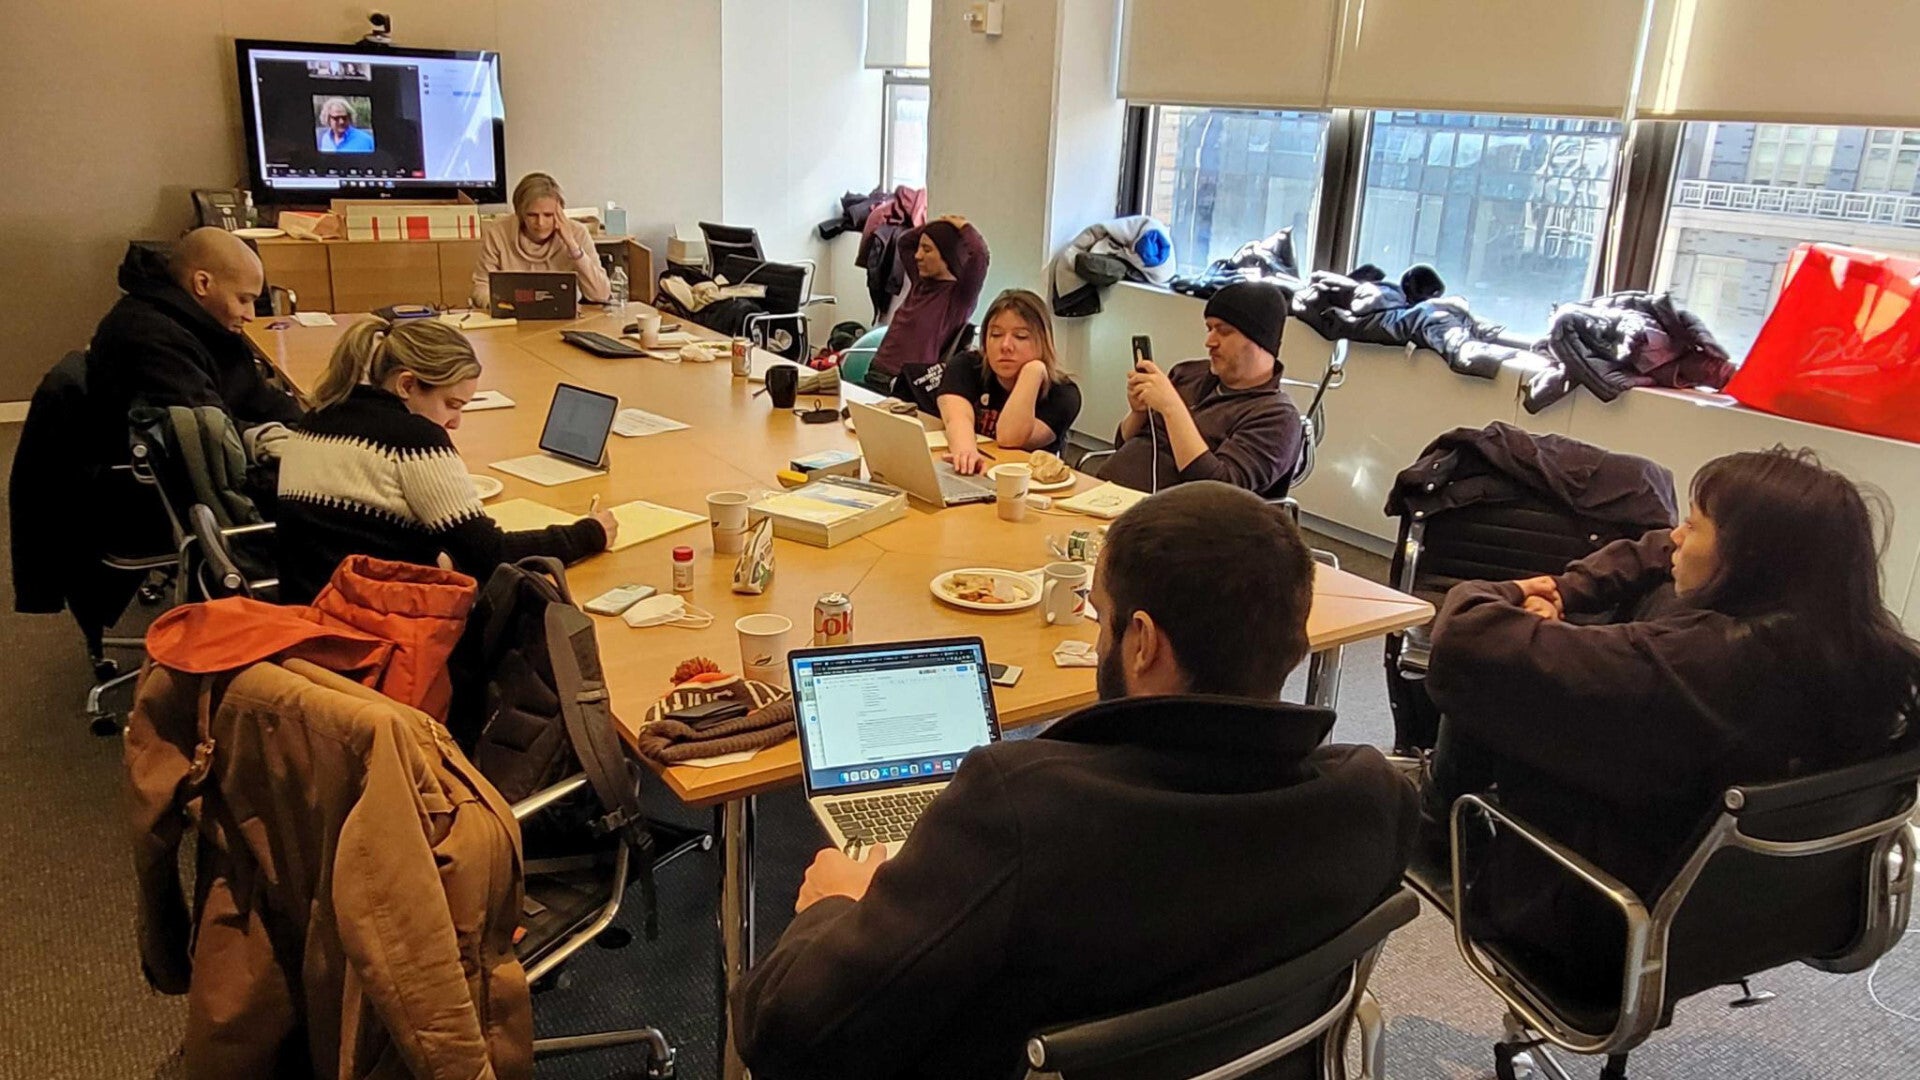 Called away from the rally, the GMG bargaining committee gathered at the offices of the Writers Guild of America, East, alongside teleconferenced colleagues, for a sudden bargaining session that lasted into the next morning. (Photo: Kotaku)